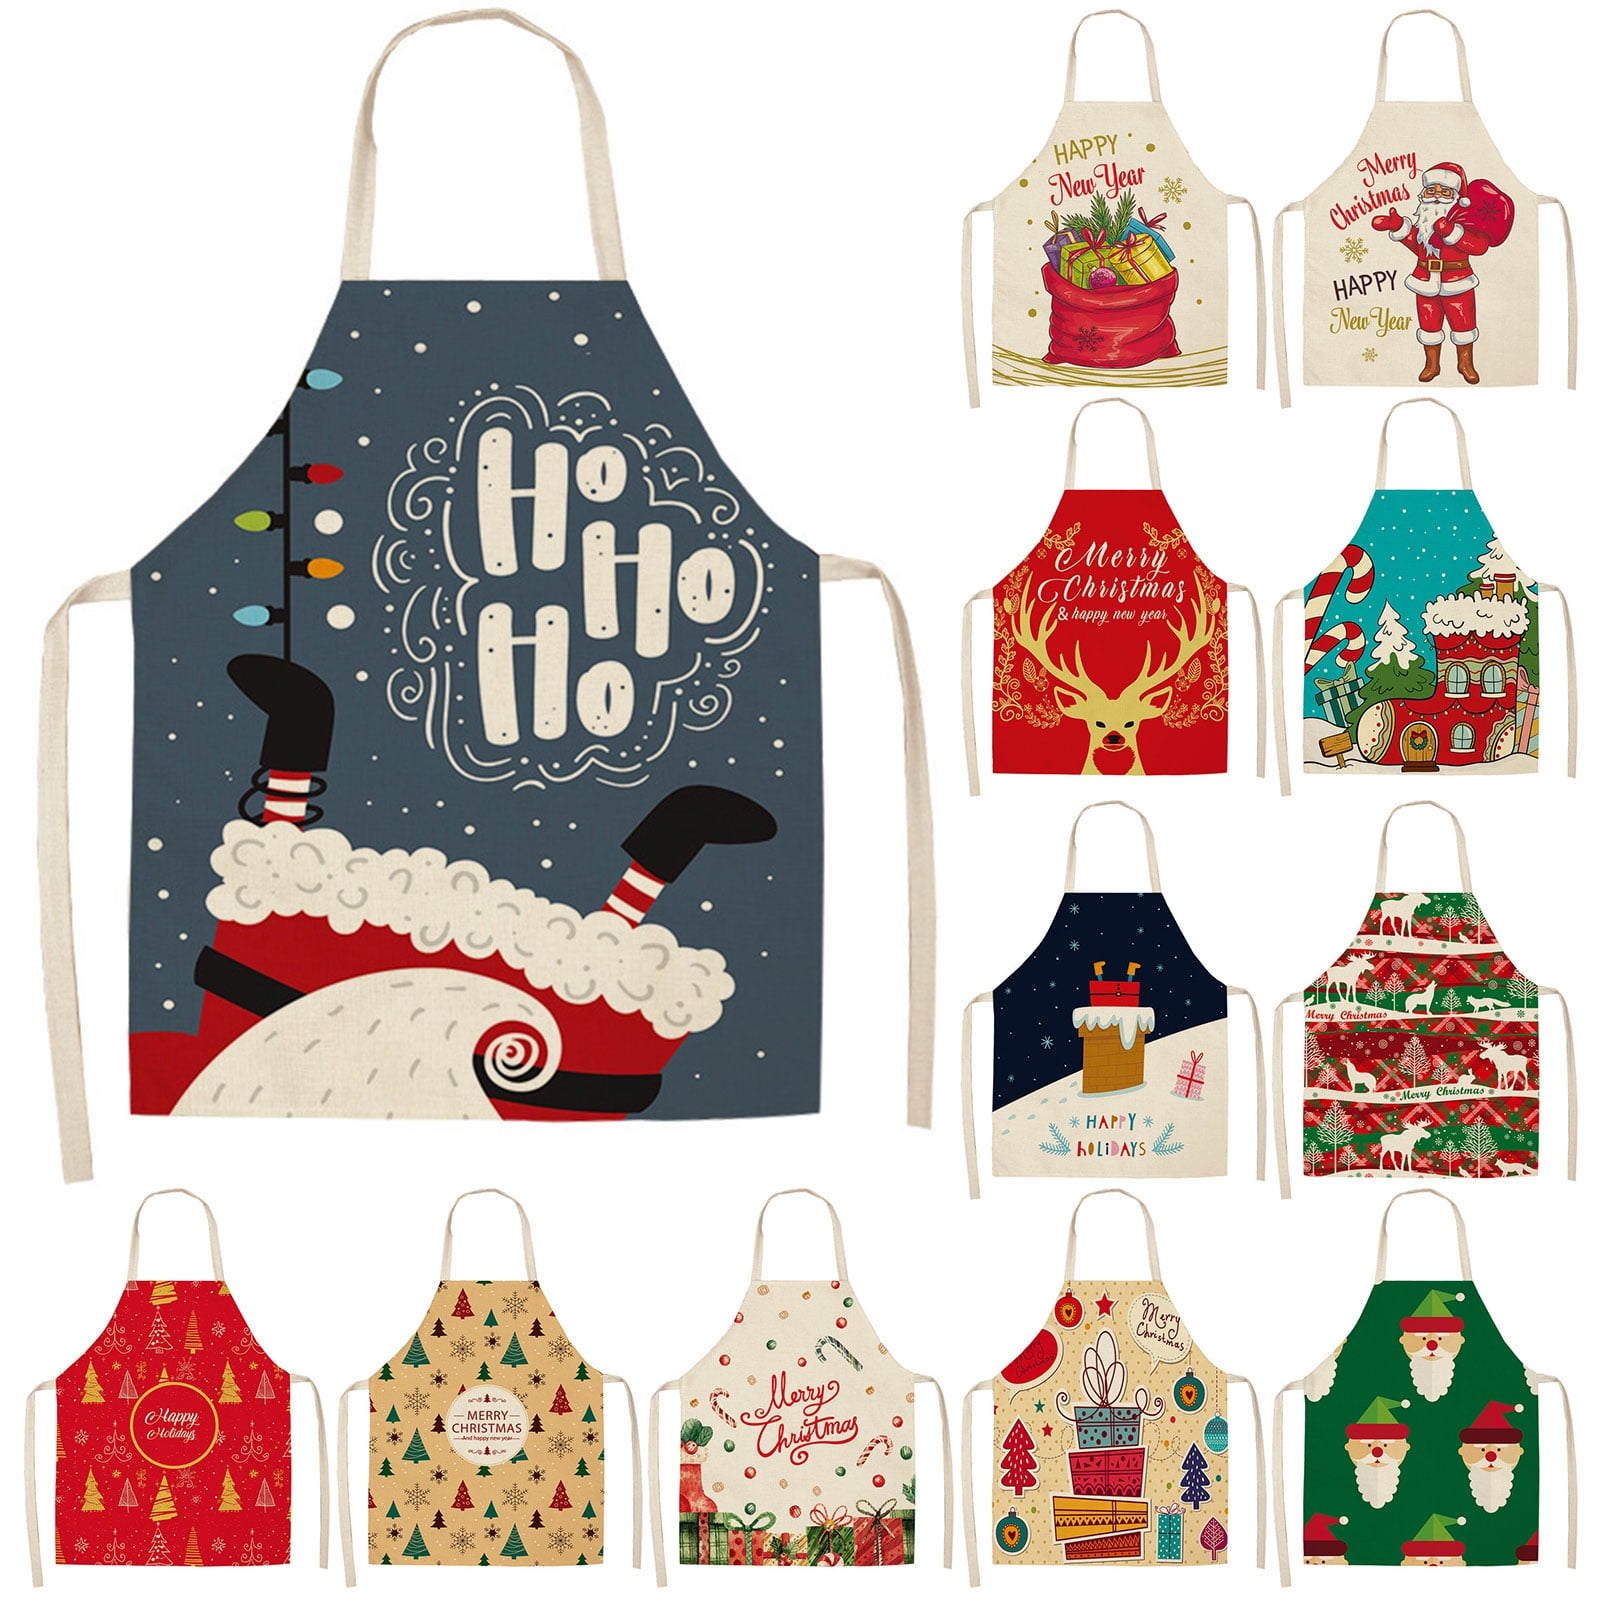 100% Cotton Cooking Apron Oven Mitt Gloves Tea Towels Silver Pines XMAS Gift Set